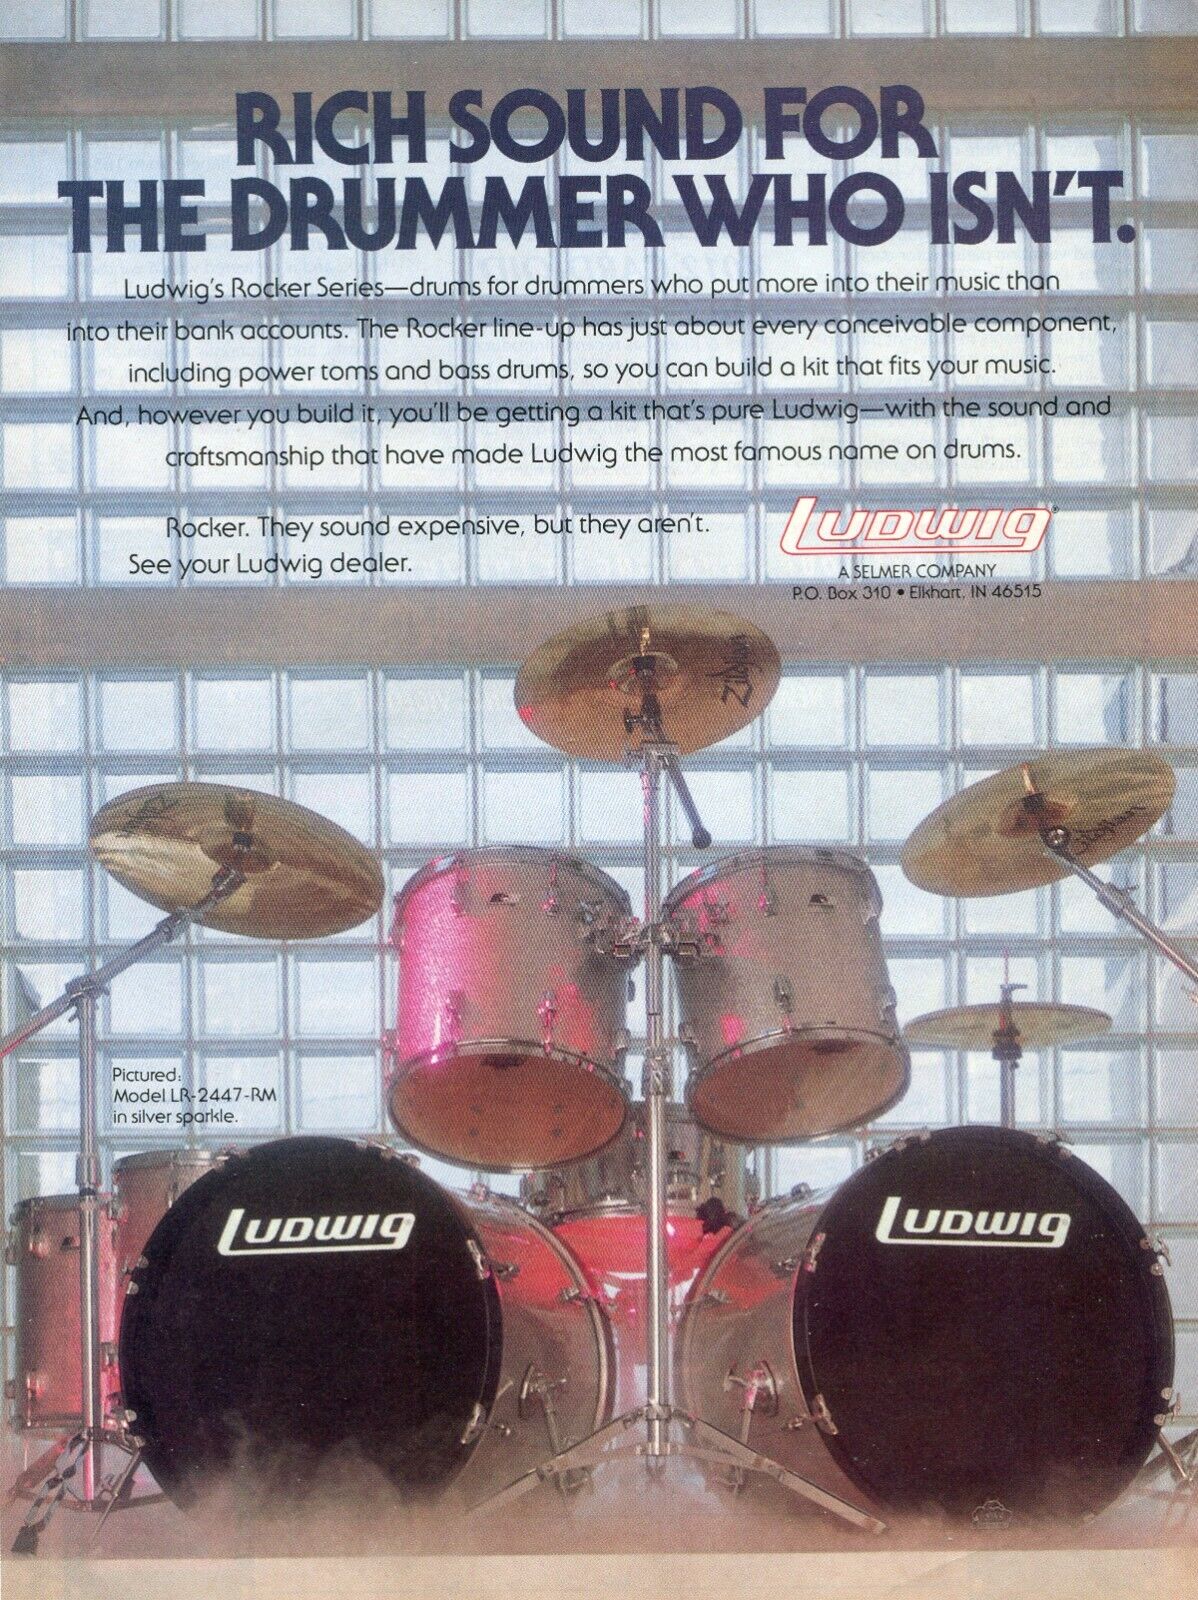 1990 Print Ad of Ludwig Rocker Series Drum Kit Silver Sparkle Finish